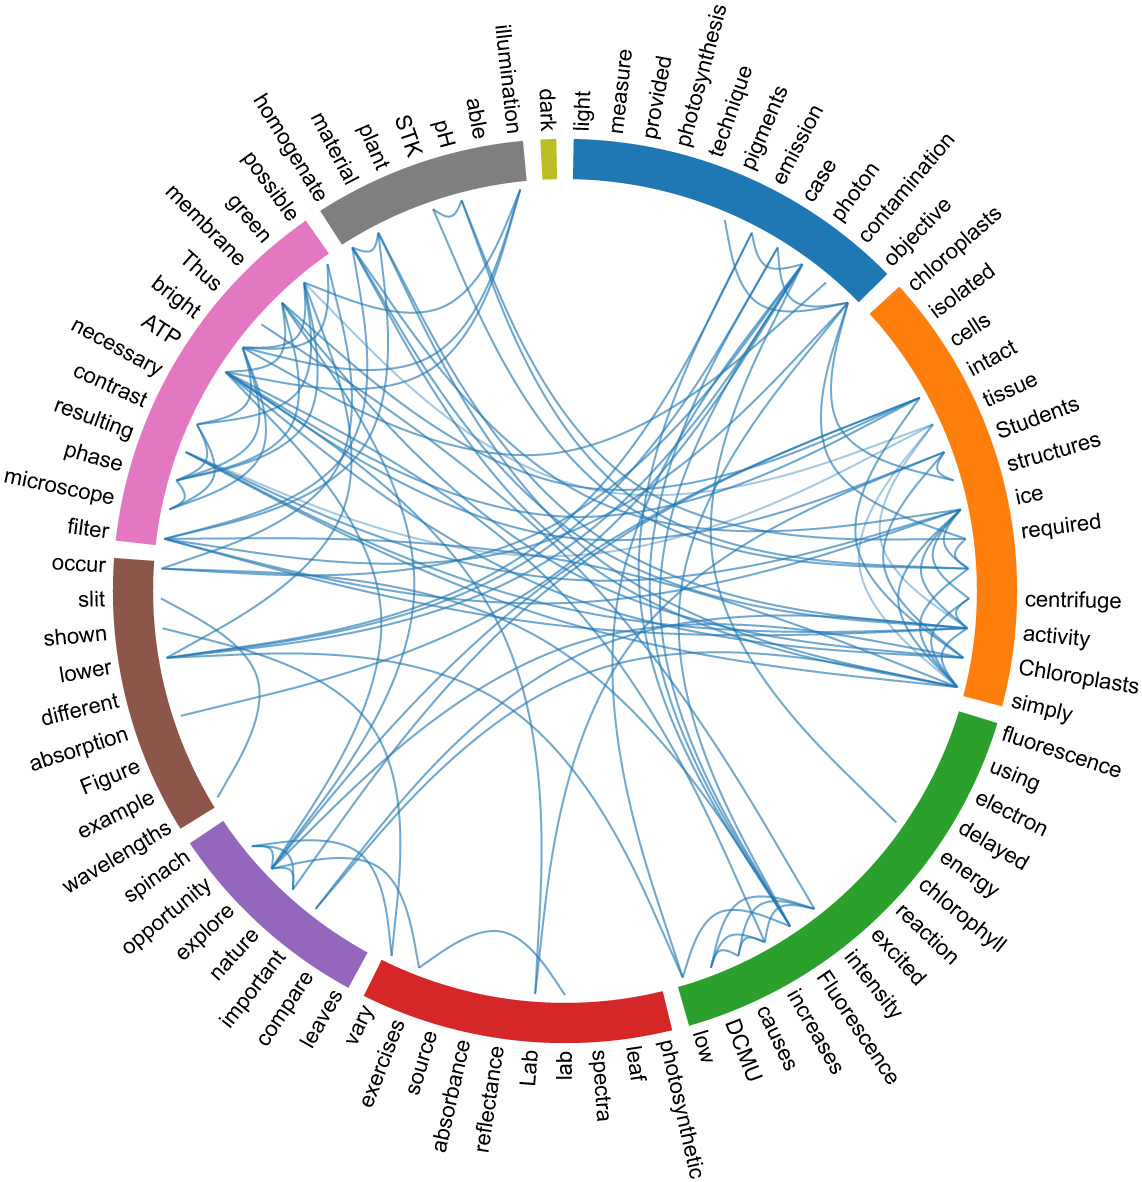 Correlation wheel showing related topics from the lab manual